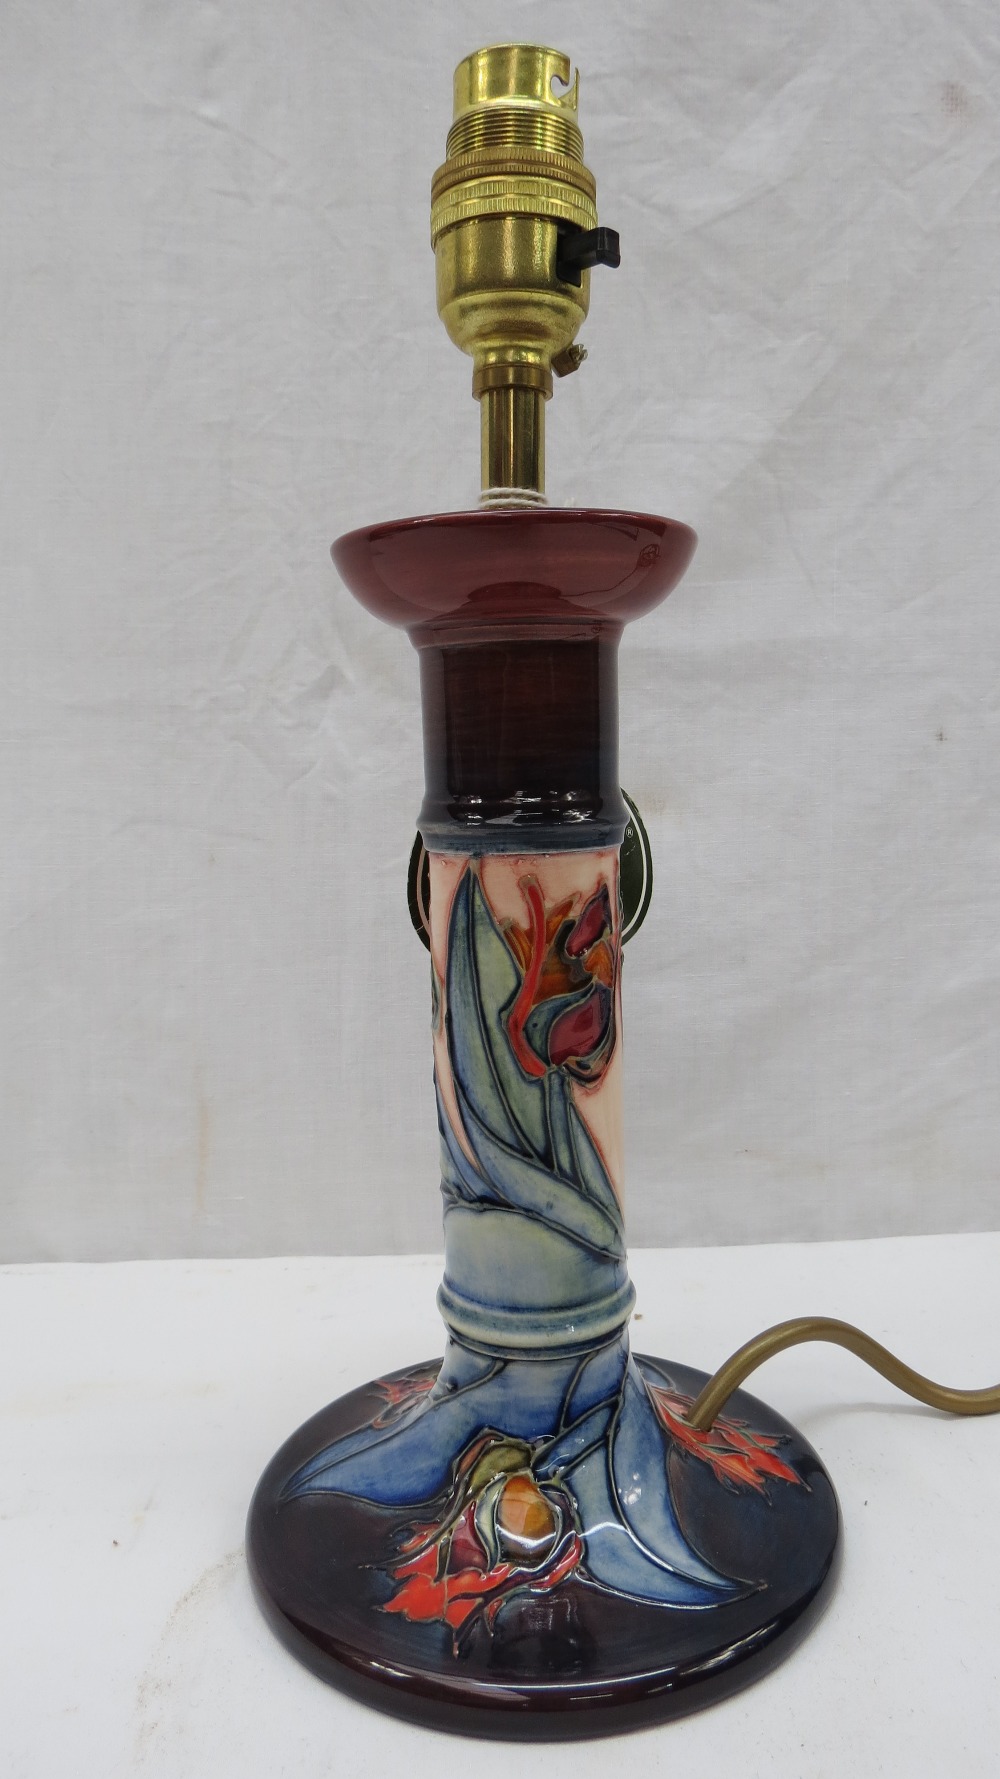 A Moorcroft table lamp with tulip design